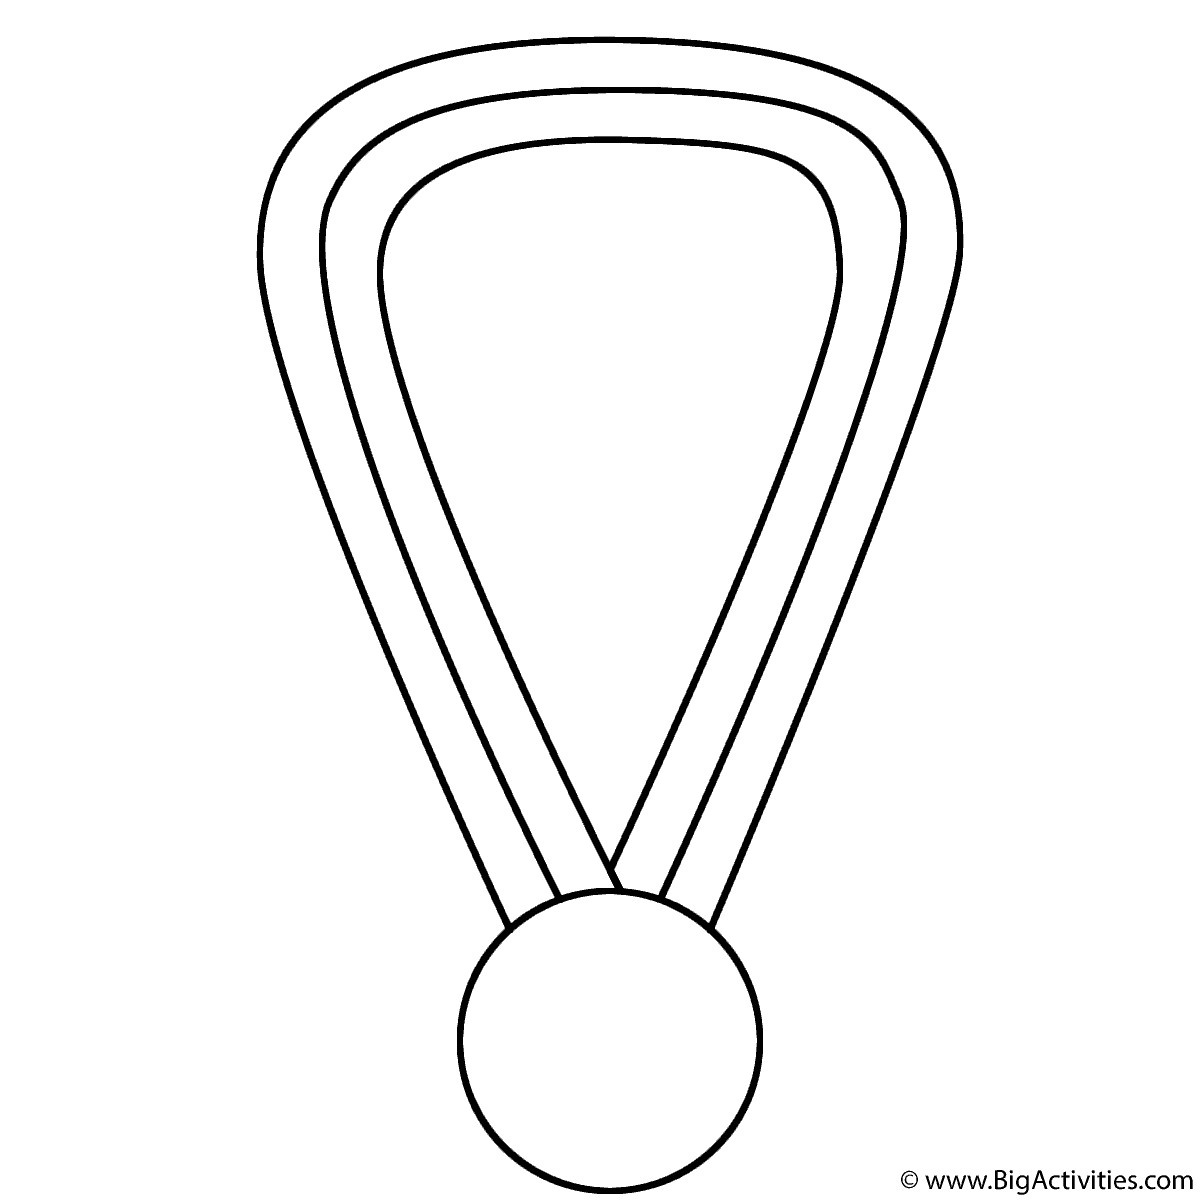 Olympic Coloring Sheets For Kids
 Olympic Bronze Medal Coloring Page Olympics